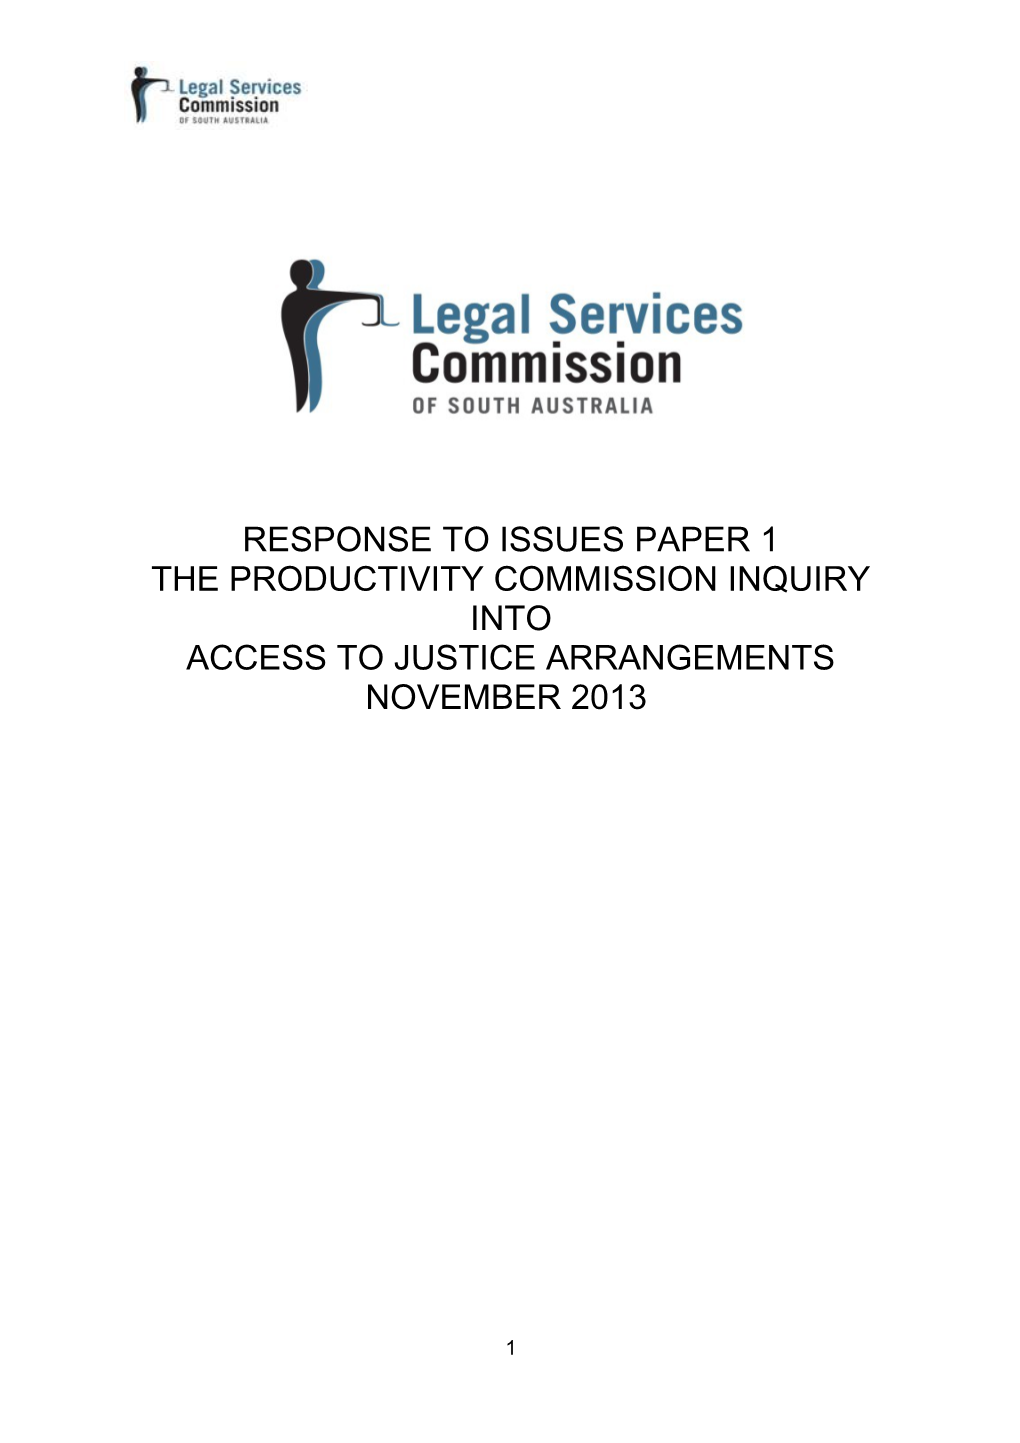 Submission 93 - Legal Services Commission of South Australia - Access to Justice Arrangements